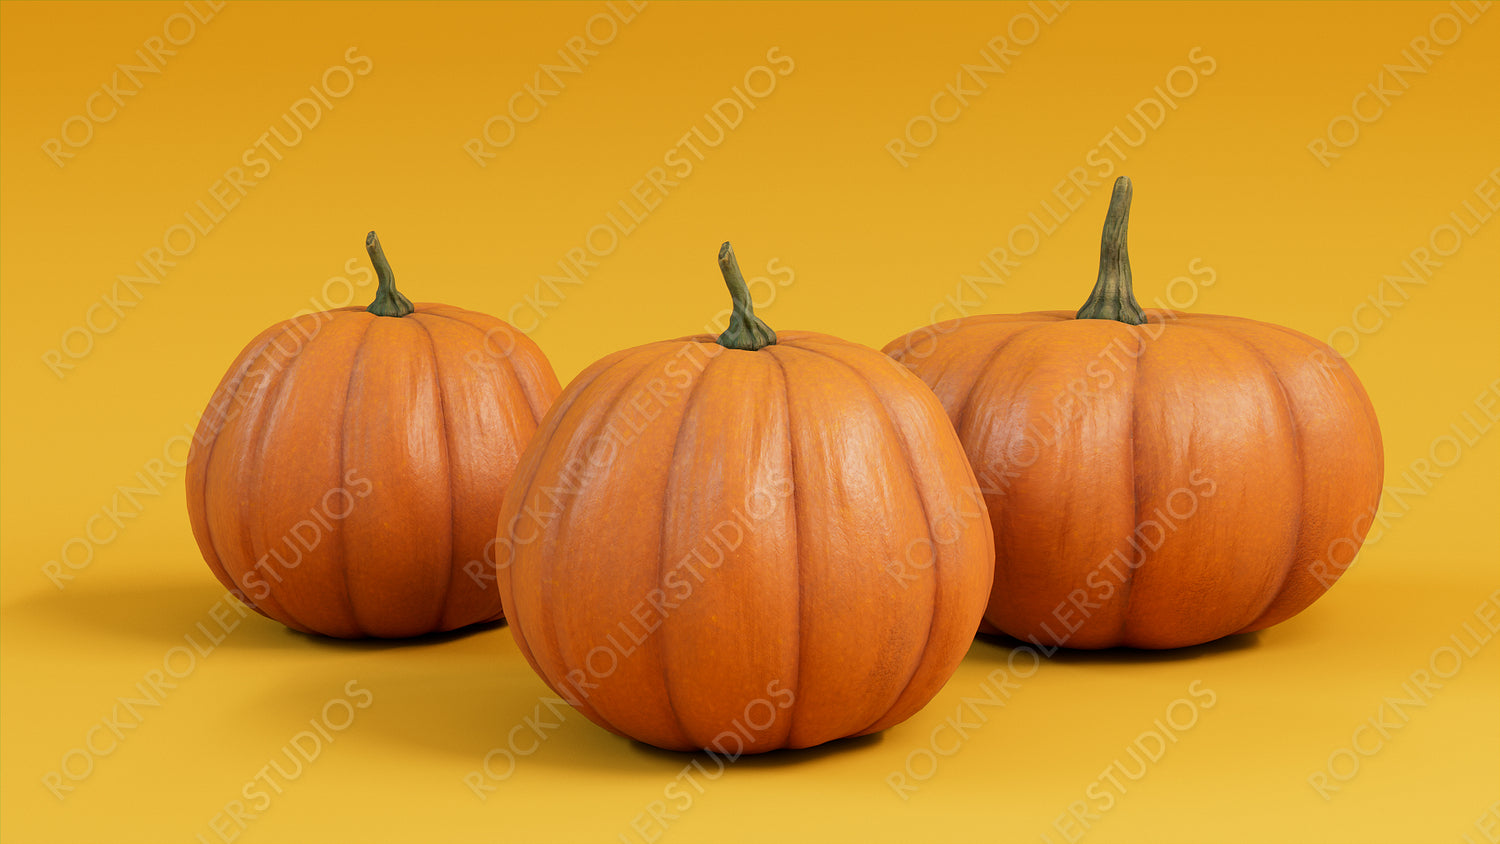 Contemporary Autumn Image with a collection of Pumpkins on Mustard Yellow background.